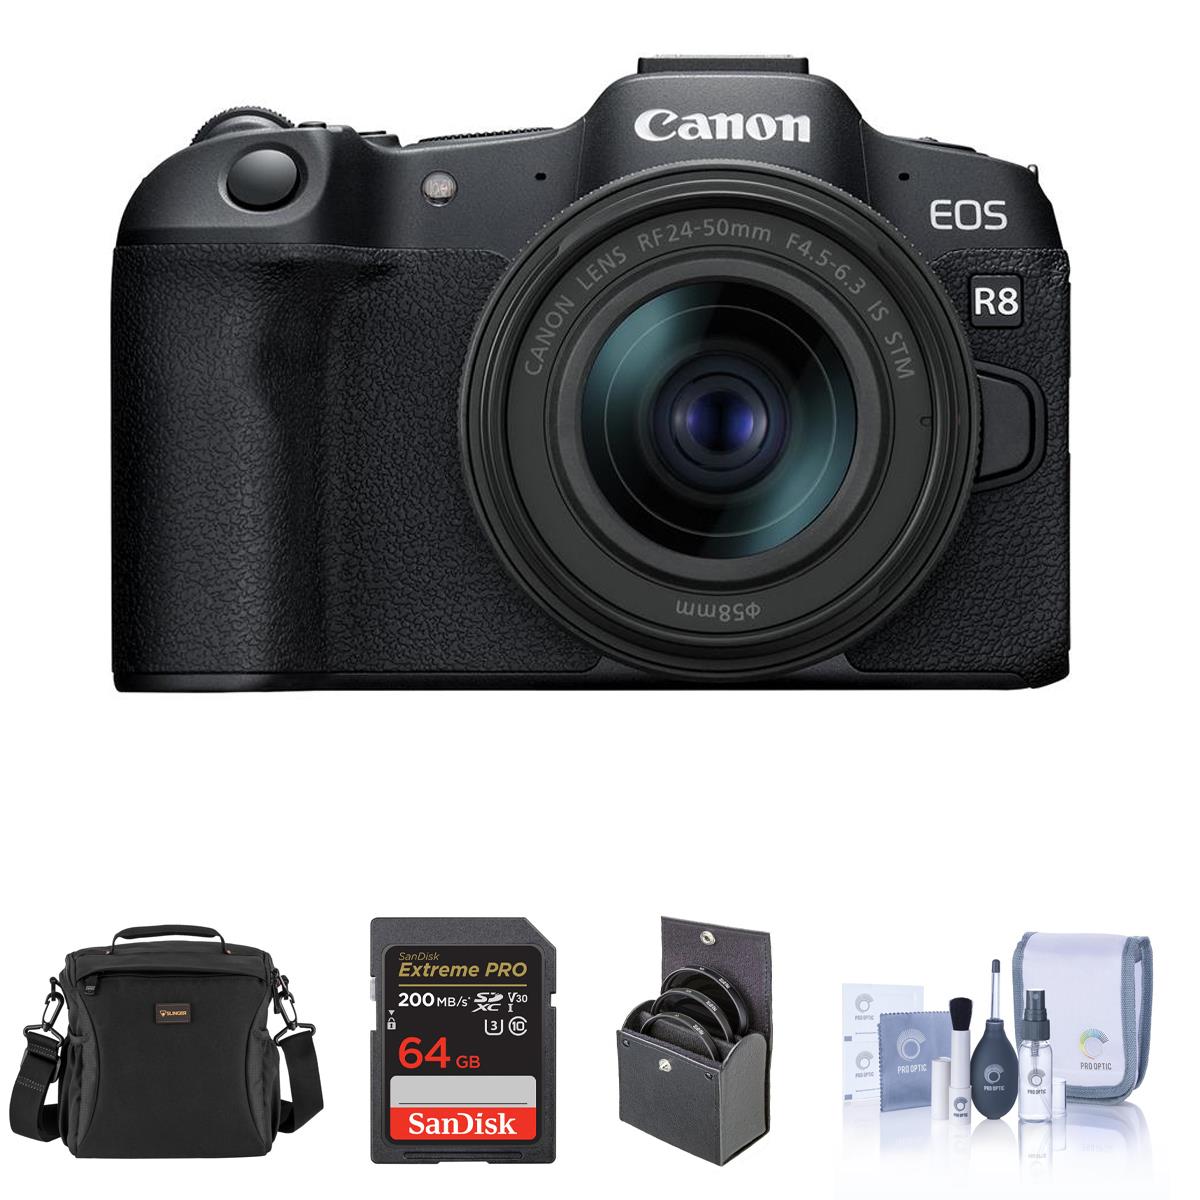 Image of Canon EOS R8 Camera w/RF 24-50mm f/4.5-6.3 IS STM Lens